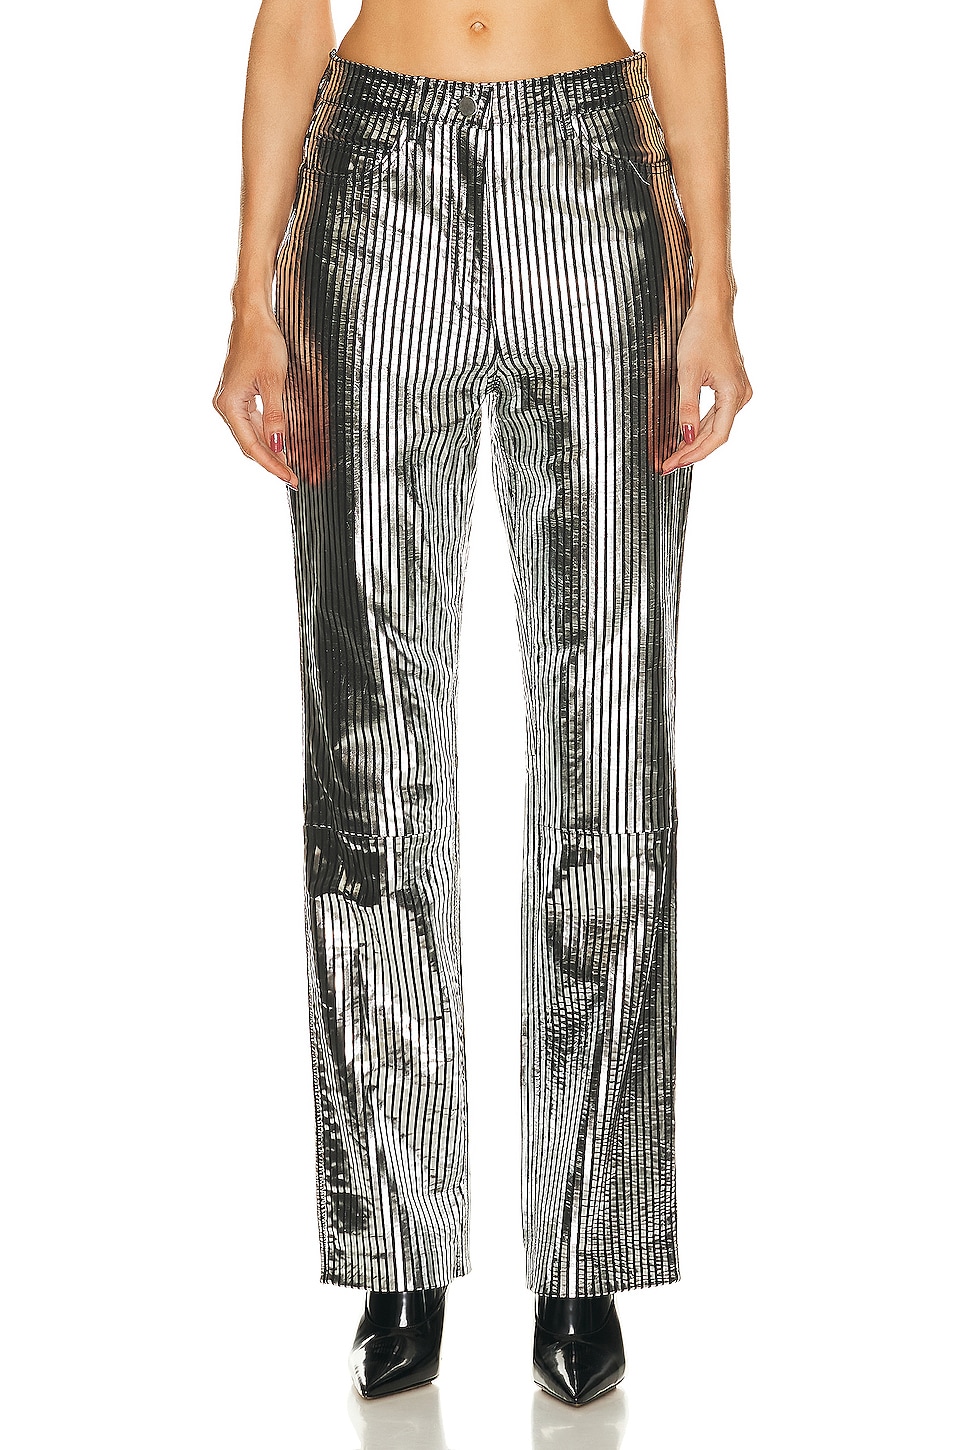 Image 1 of REMAIN Striped Leather Pant in Black Combo